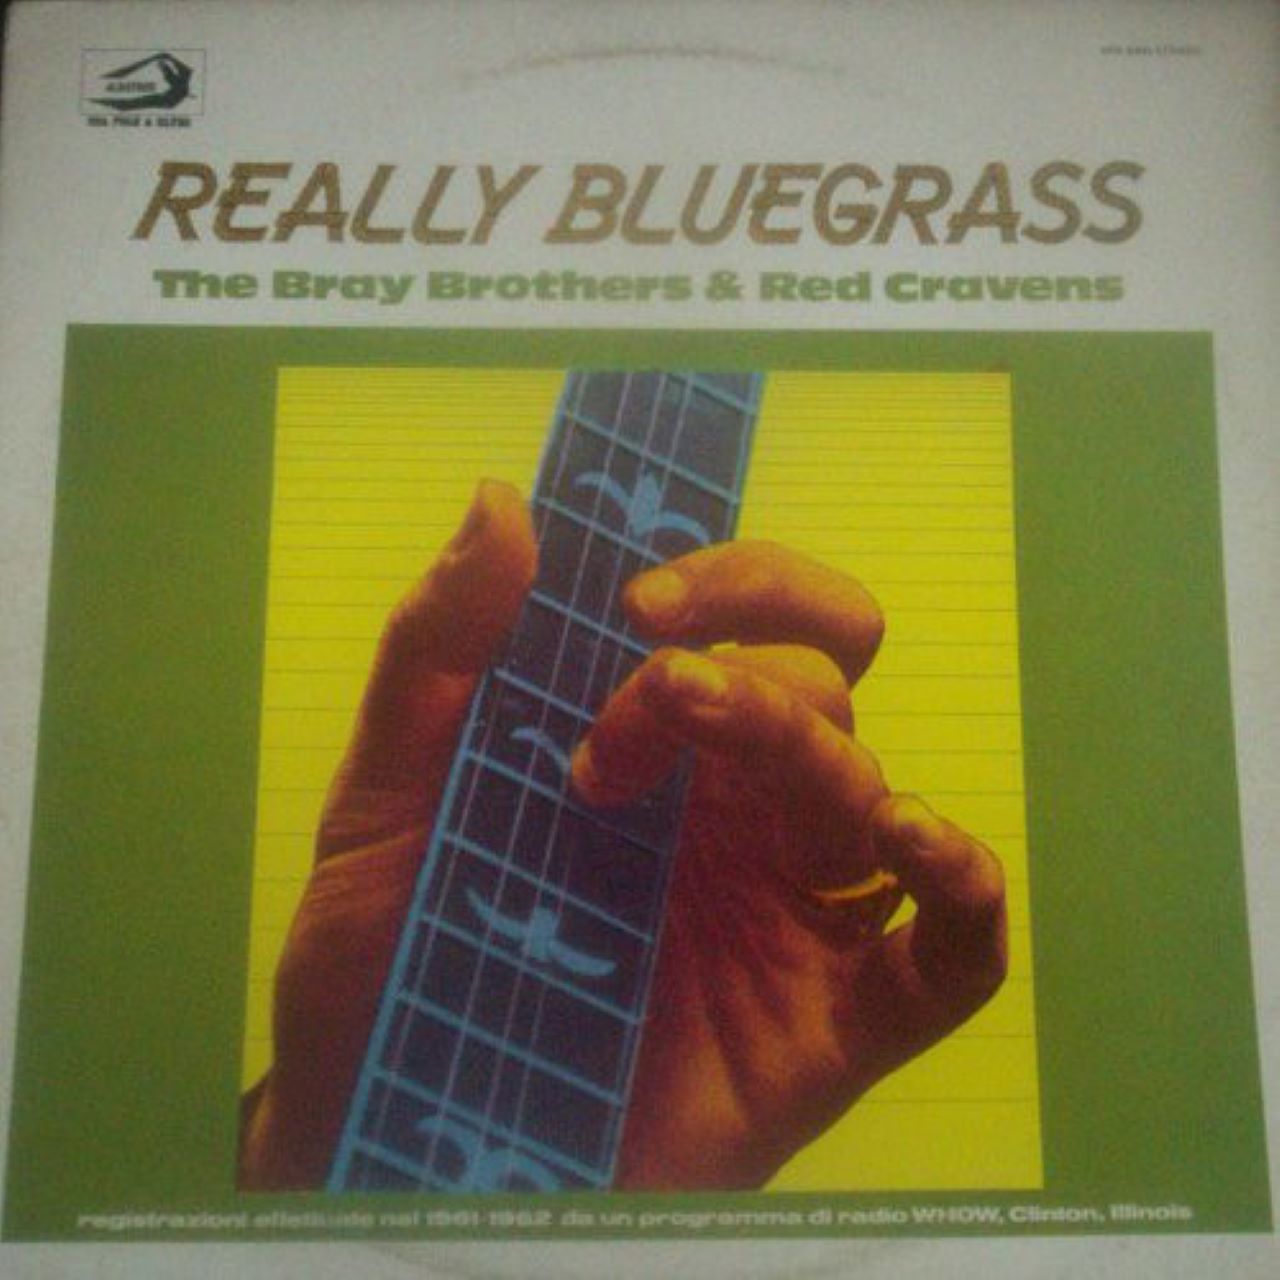 Bray Brothers & Red Cravens - Really Bluegrass cover album